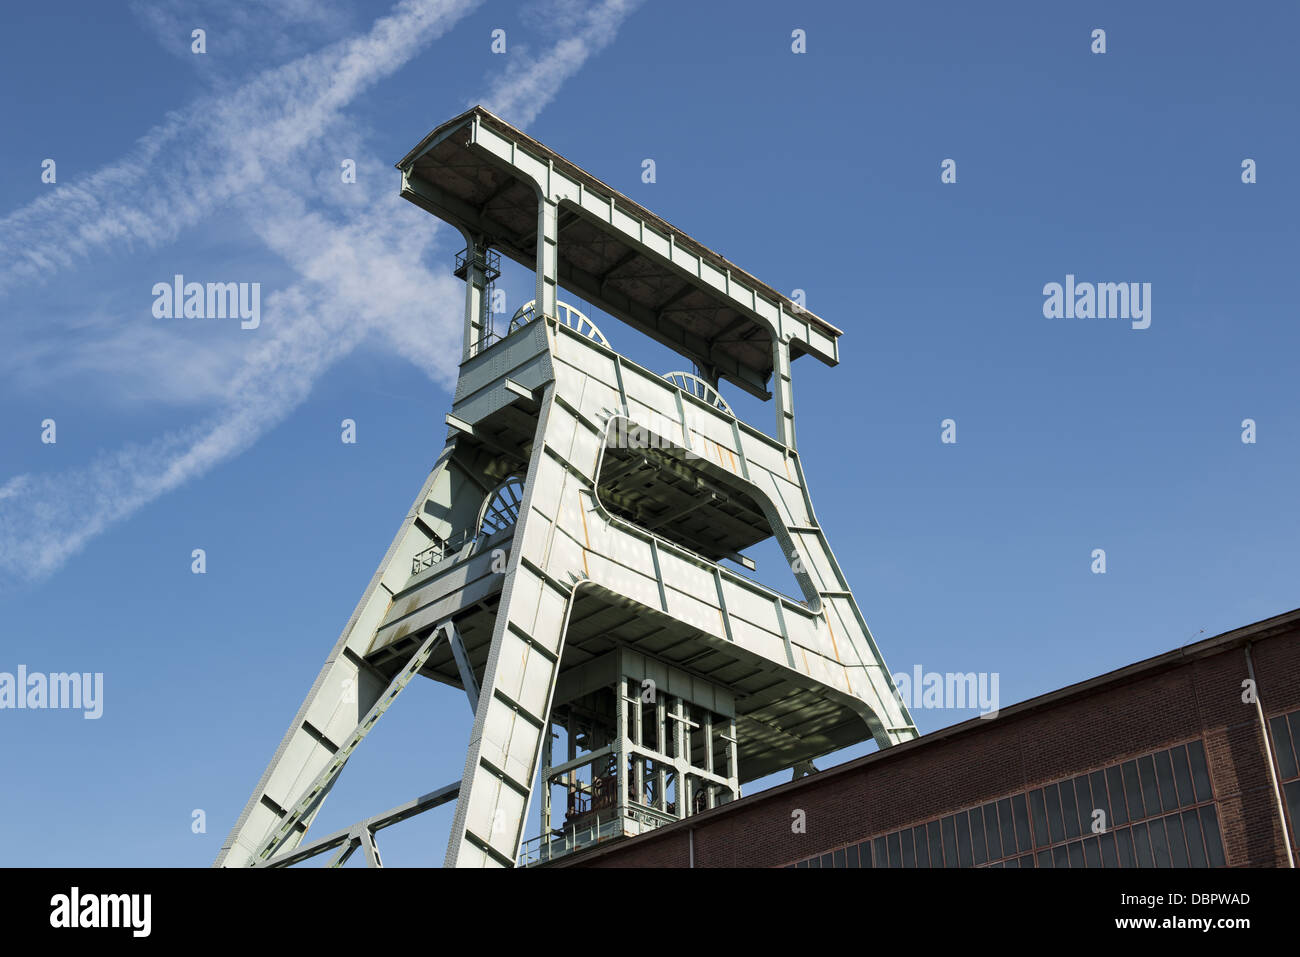 Coal mine headframe above an underground mine shaft, Herne is located in the Ruhr area in Germany. Stock Photo